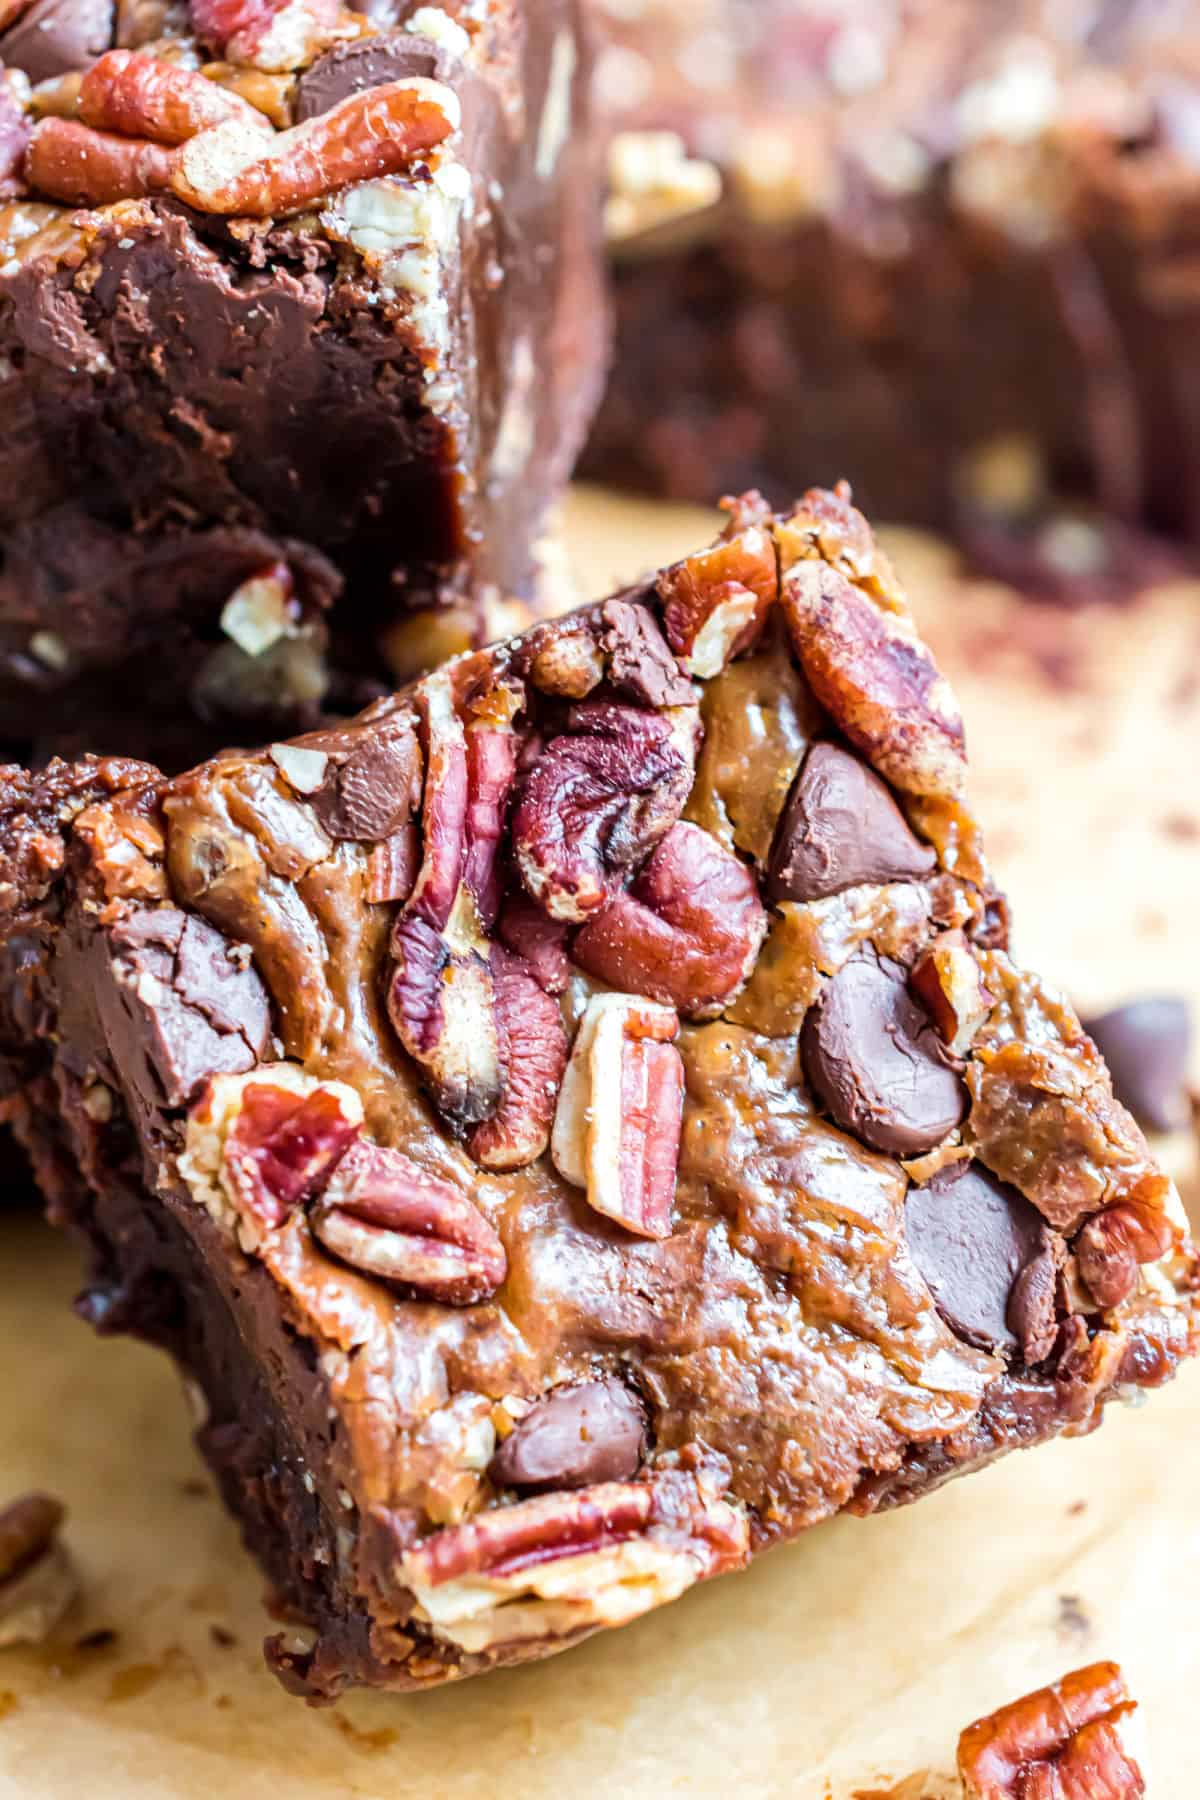 Thick brownie topped with pecans and caramel.